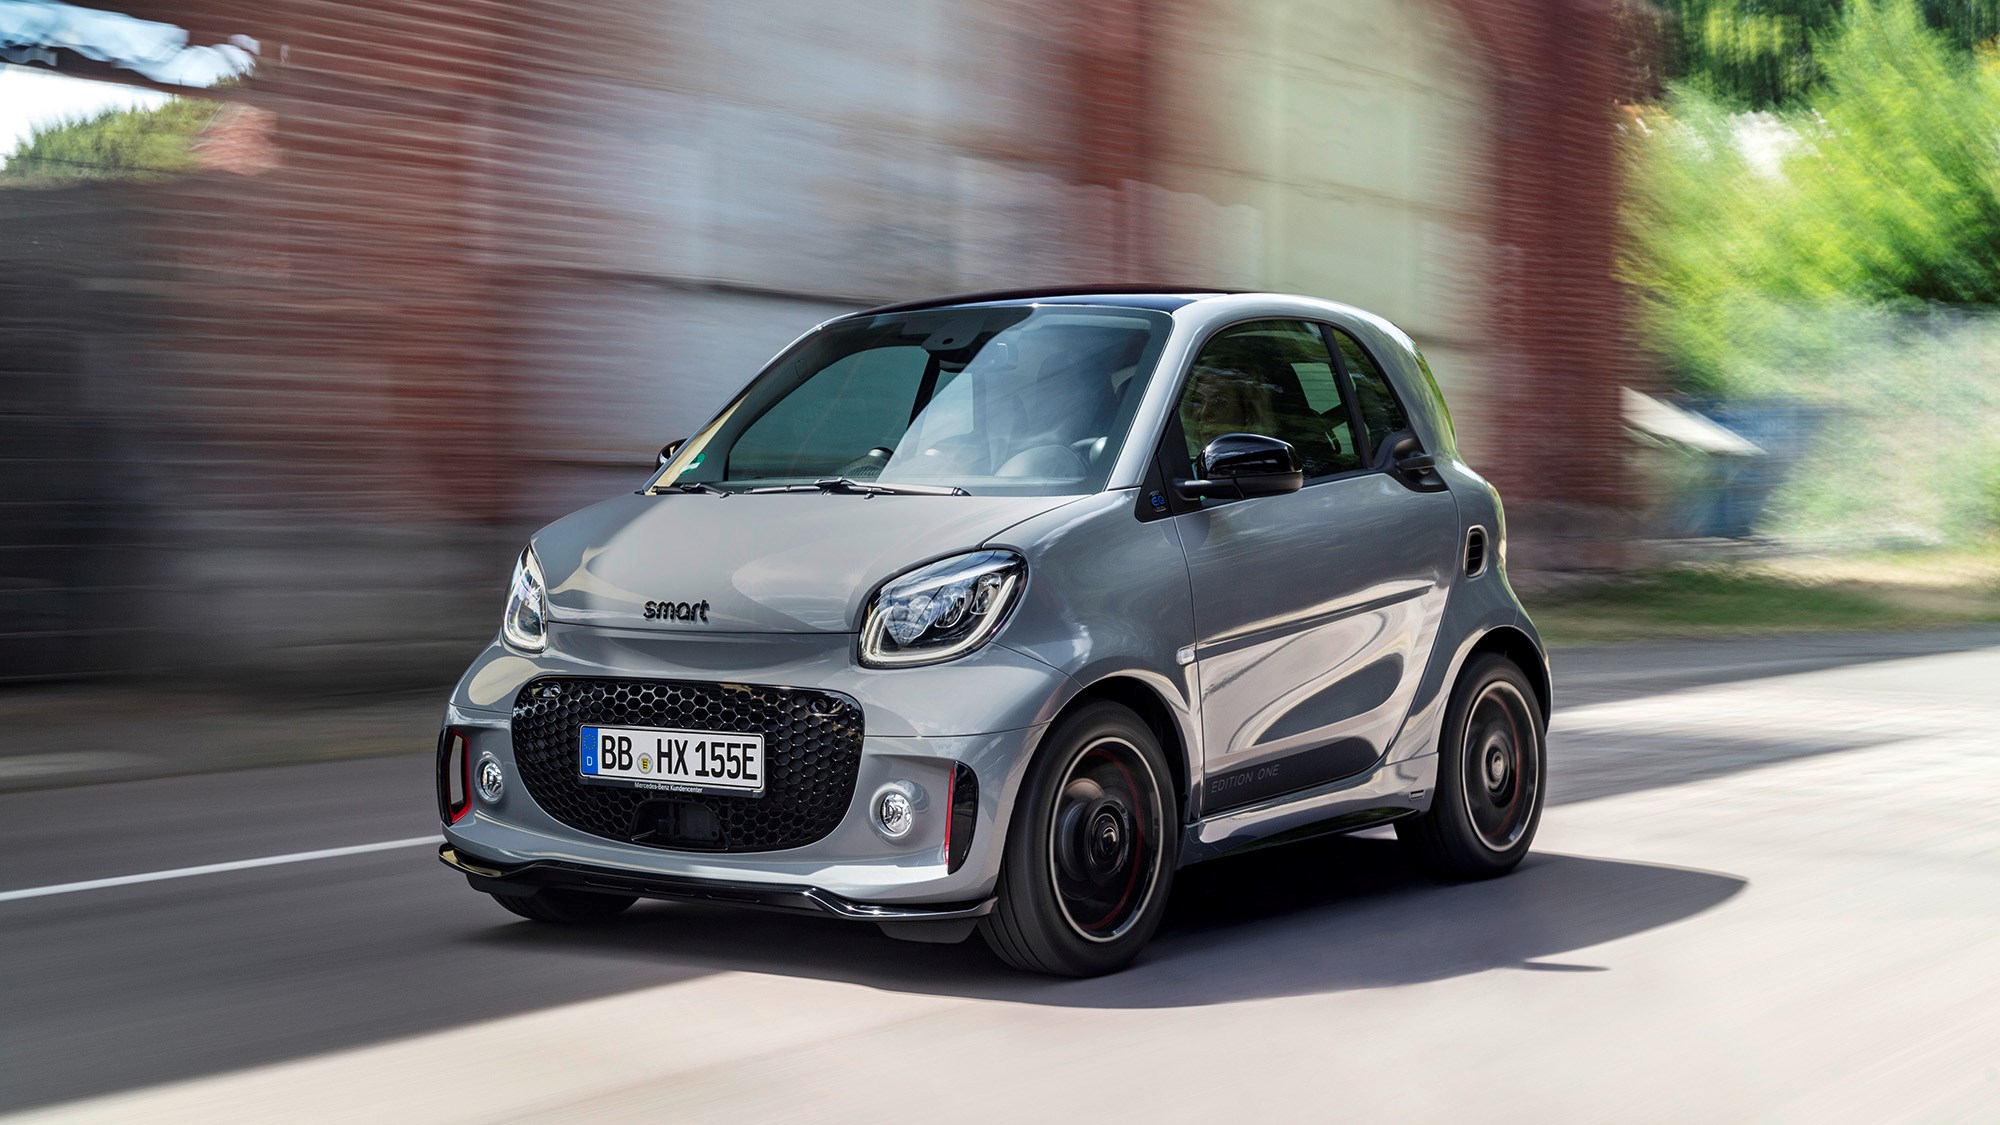 Smart EQ Fortwo review: UK's cheapest EV driven